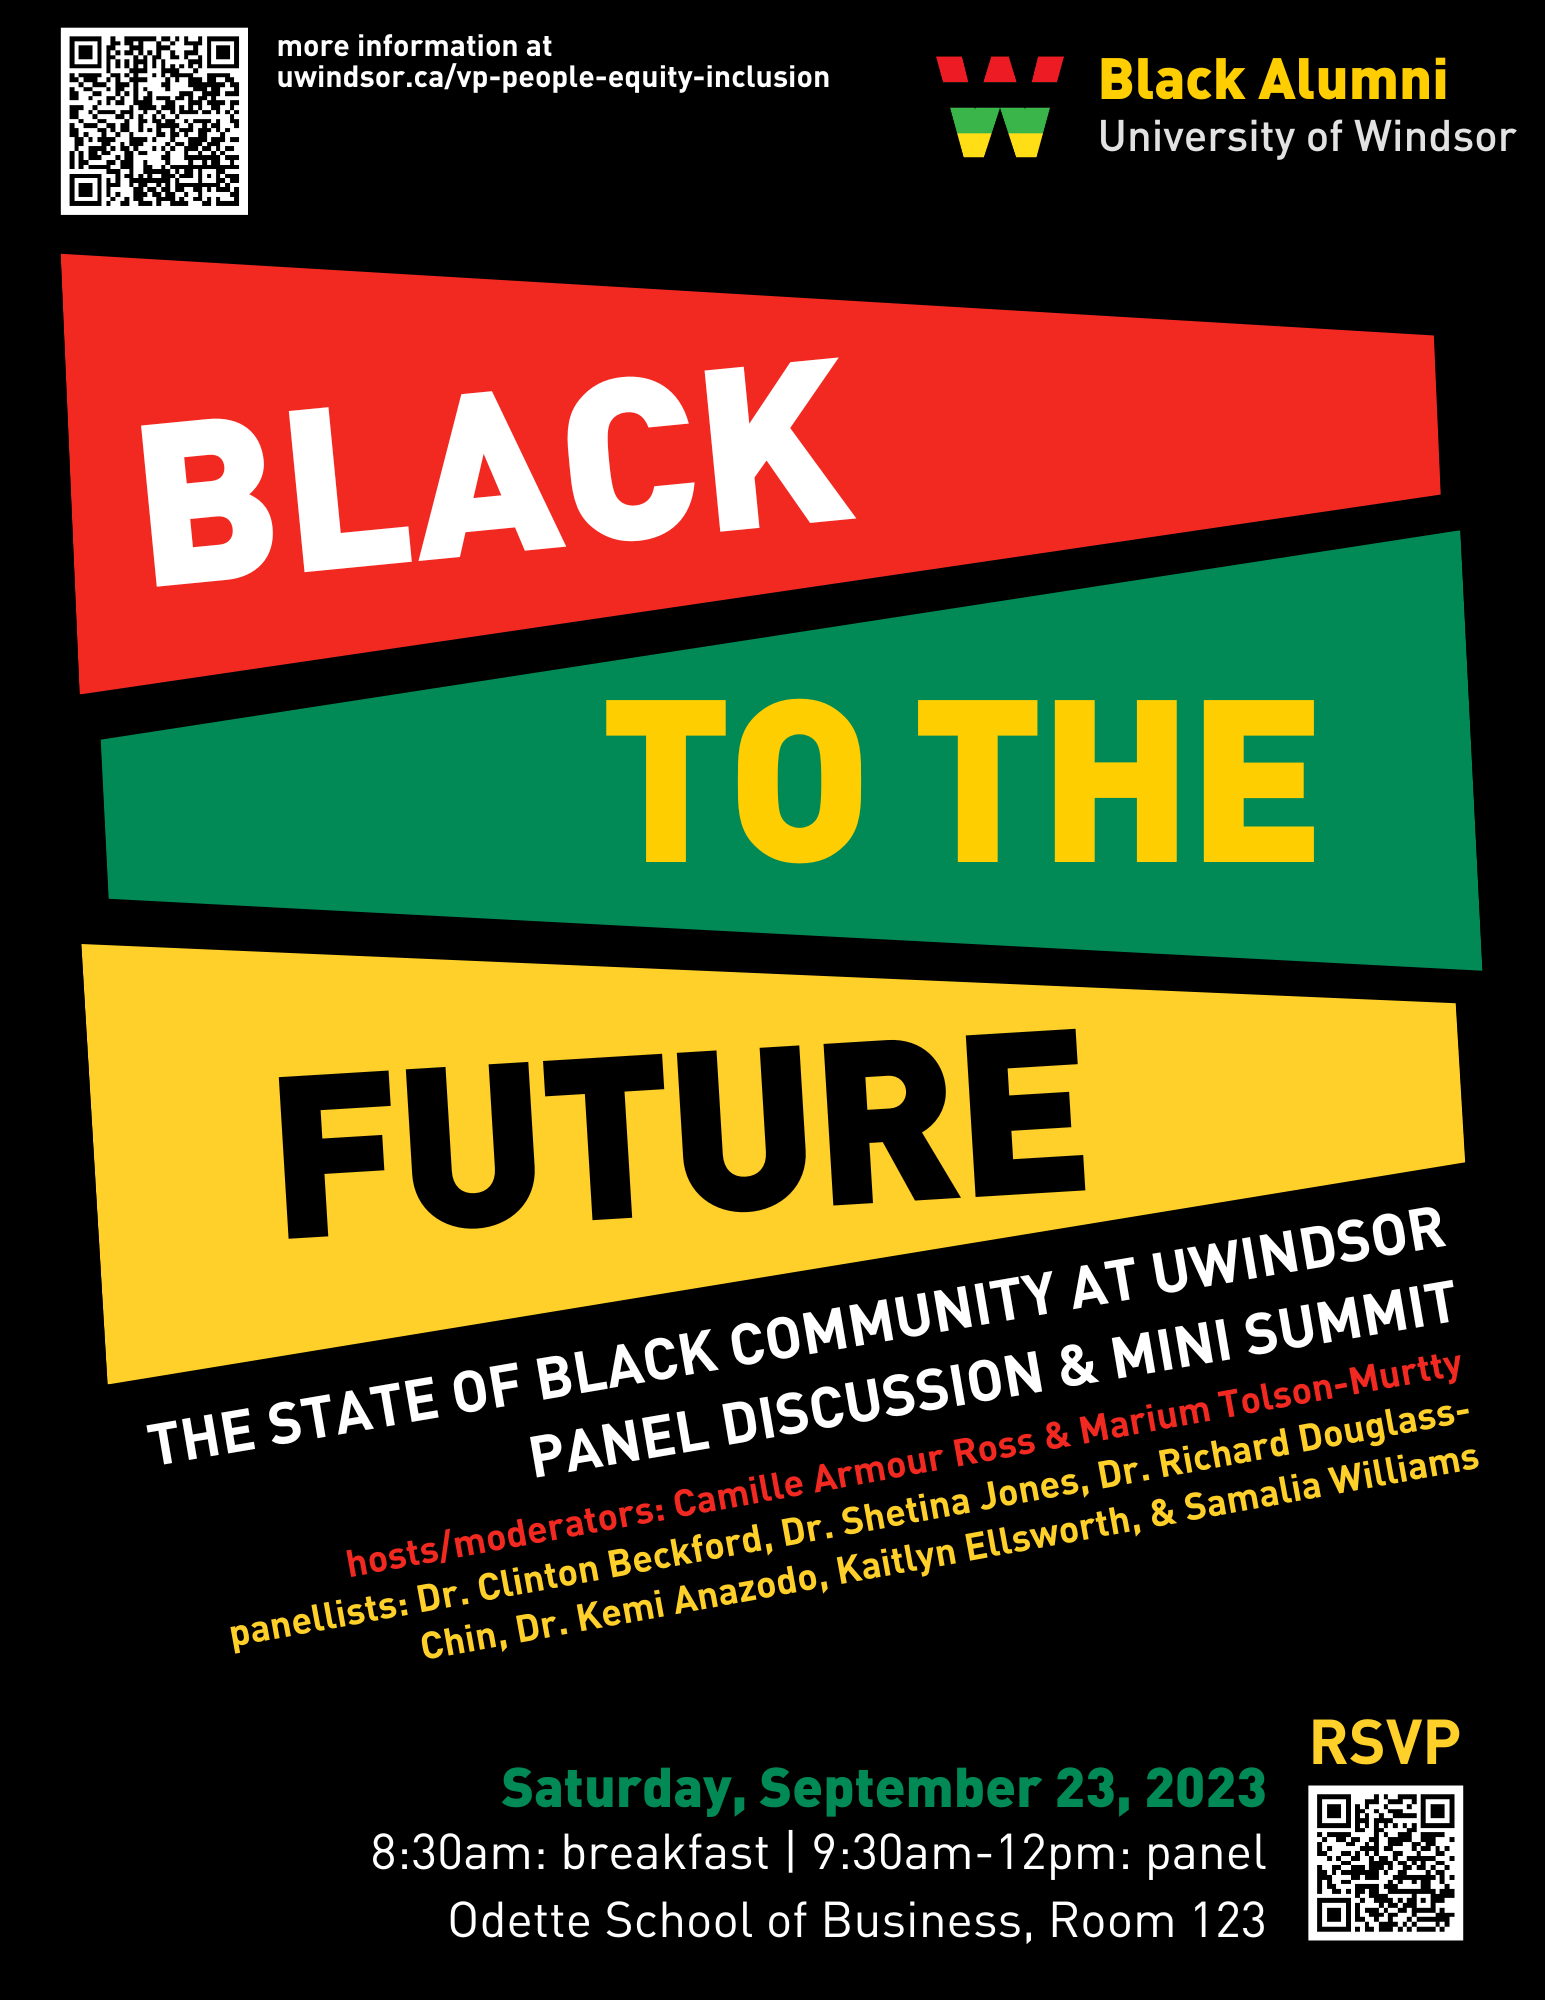 Red green and yellow banners with text Black to the Future The State of Black Community at UWindsor Panel Discussion & mini summit hosts/moderators: Camille Armour Ross and Marium Tolson-Murtty | Panellists: Dr. Clinton Beckford, Dr. Shetina Jones, Dr. Richard Douglass-Chin, Dr. Kemi Anazodo, Kaitlyn Ellsworth, Samalia Williams more information at uwindsor.ca/vp-people-equity-inclusion Black Alumni University of Windsor logo. Saturday, September 23 2023 University of Windsor 8:30am-12pm RSVP 